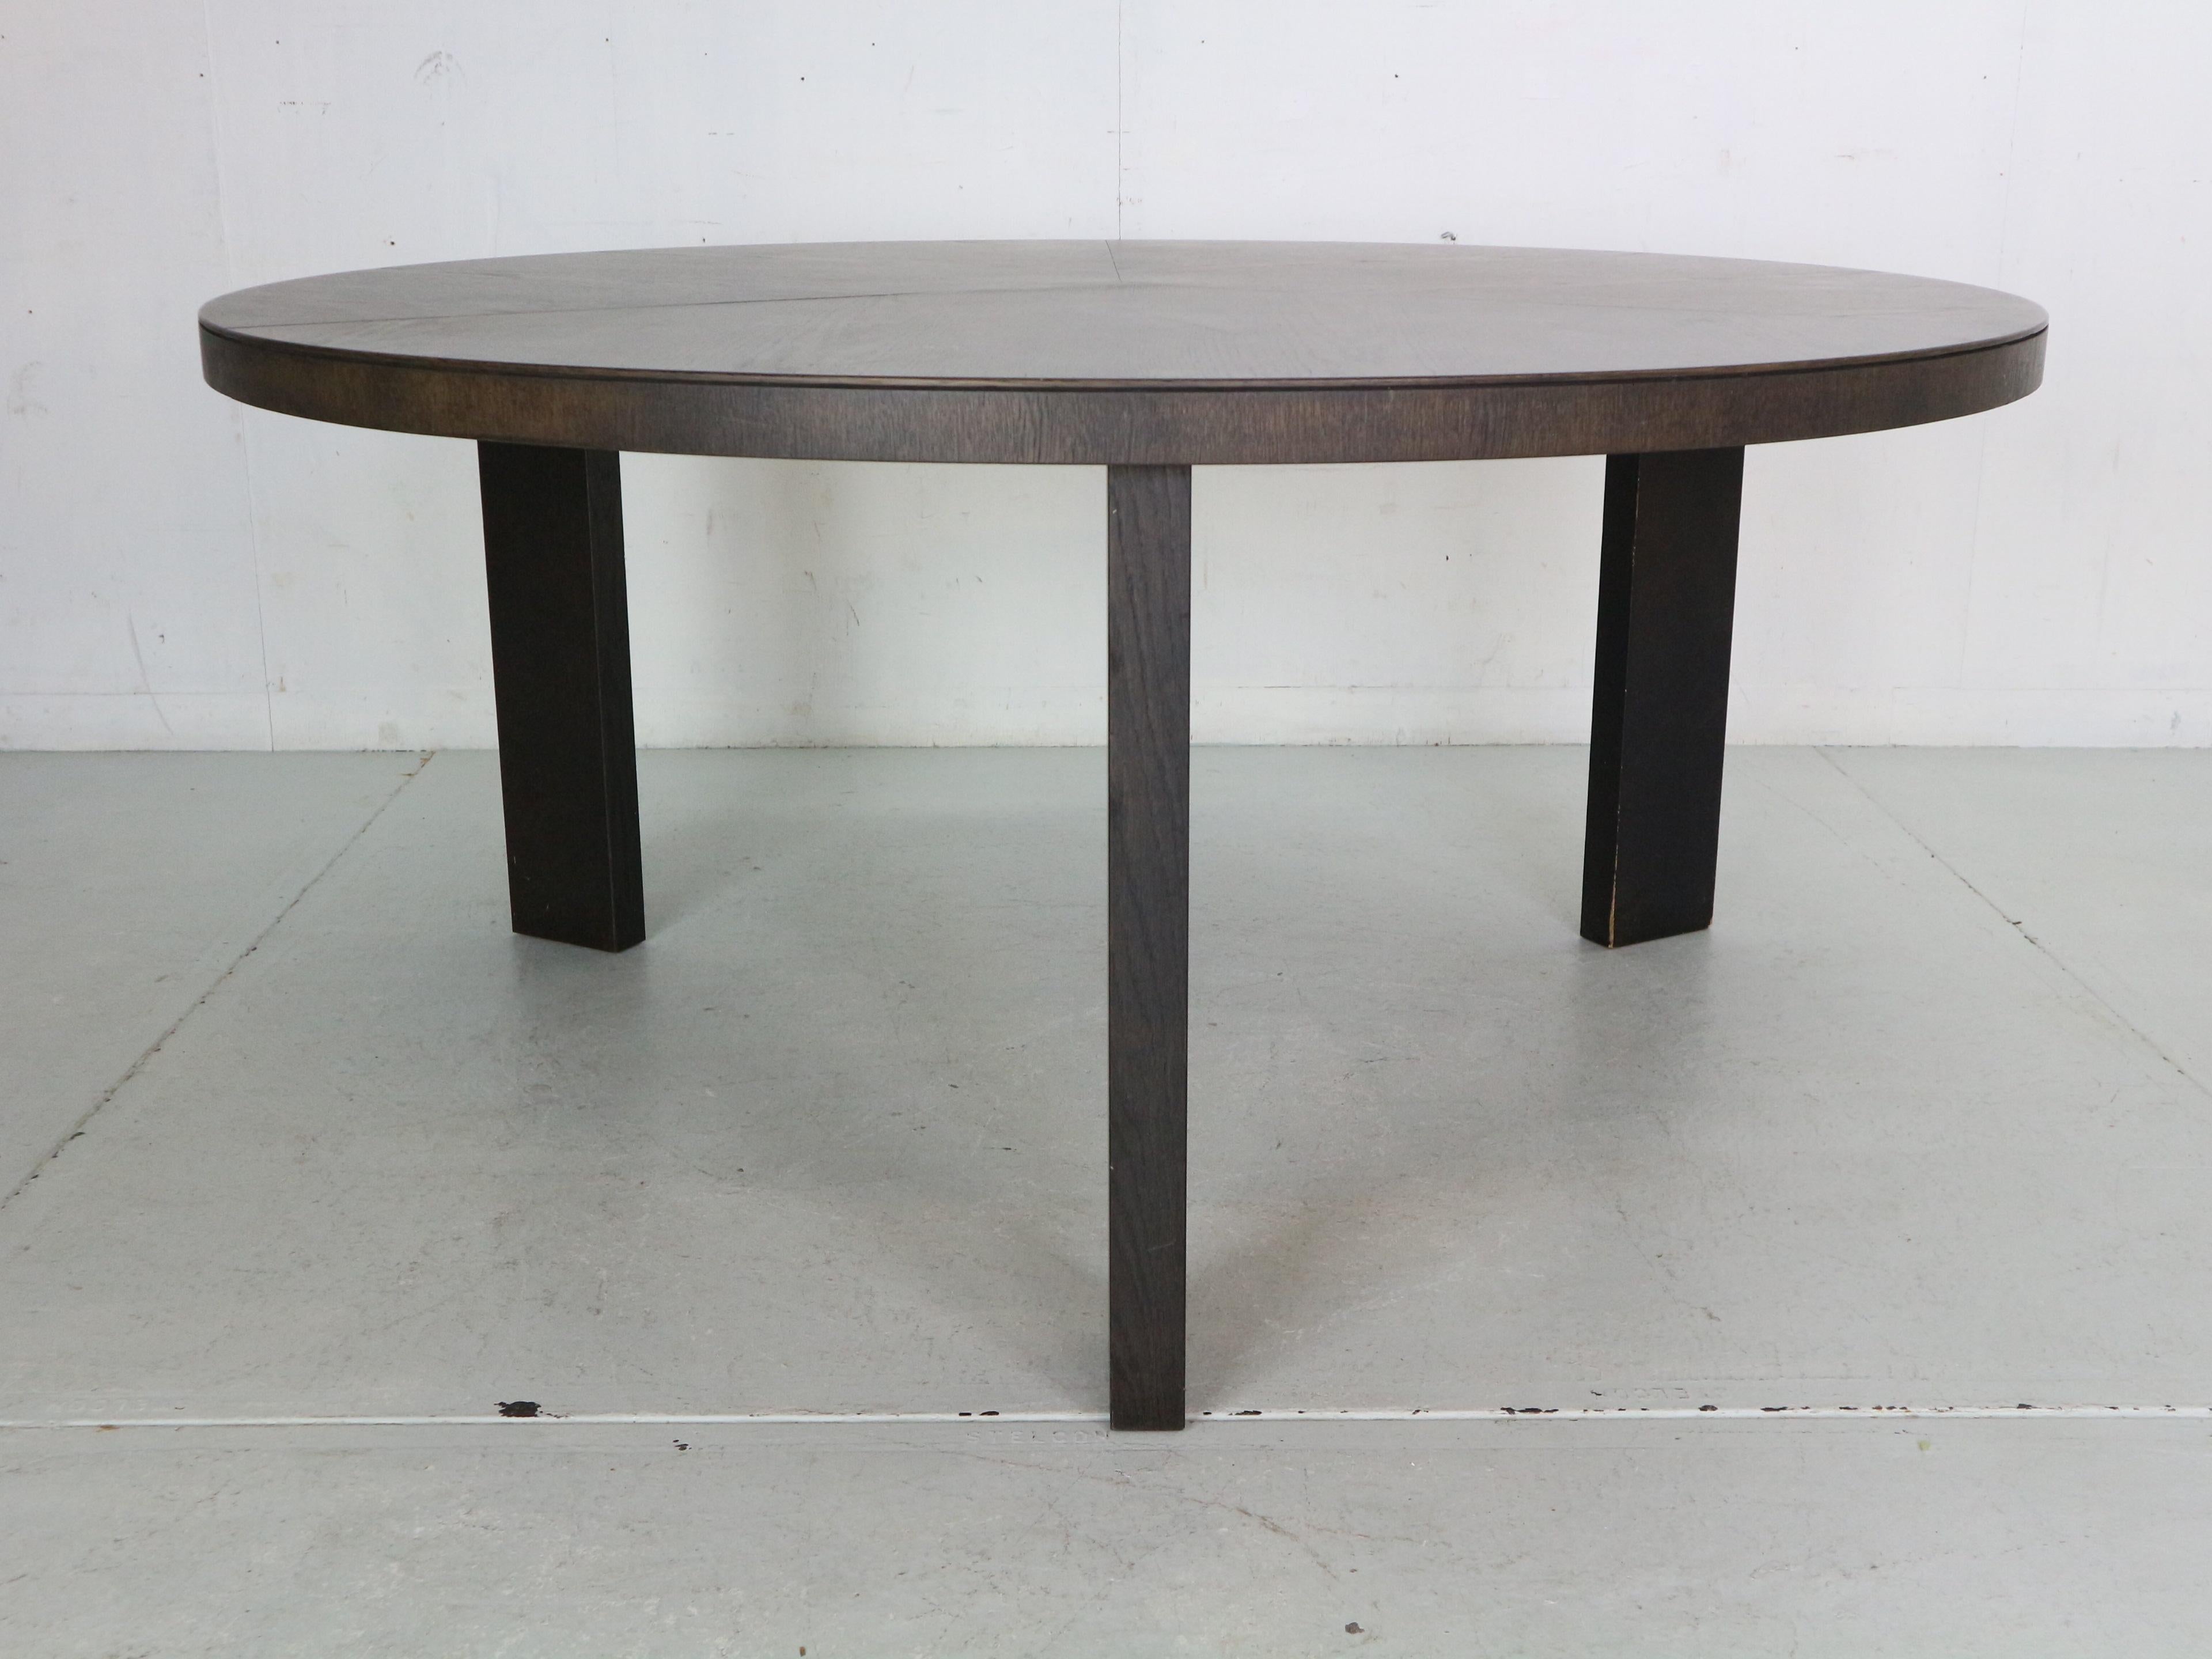 Mid- Century Modern period round dinning table, made around 1980's period, Italy.

Massive round table with beautiful triangle shaped leave.
Made of wenge processed wood.
Original, very good condition.
The legs can be taken apart for a